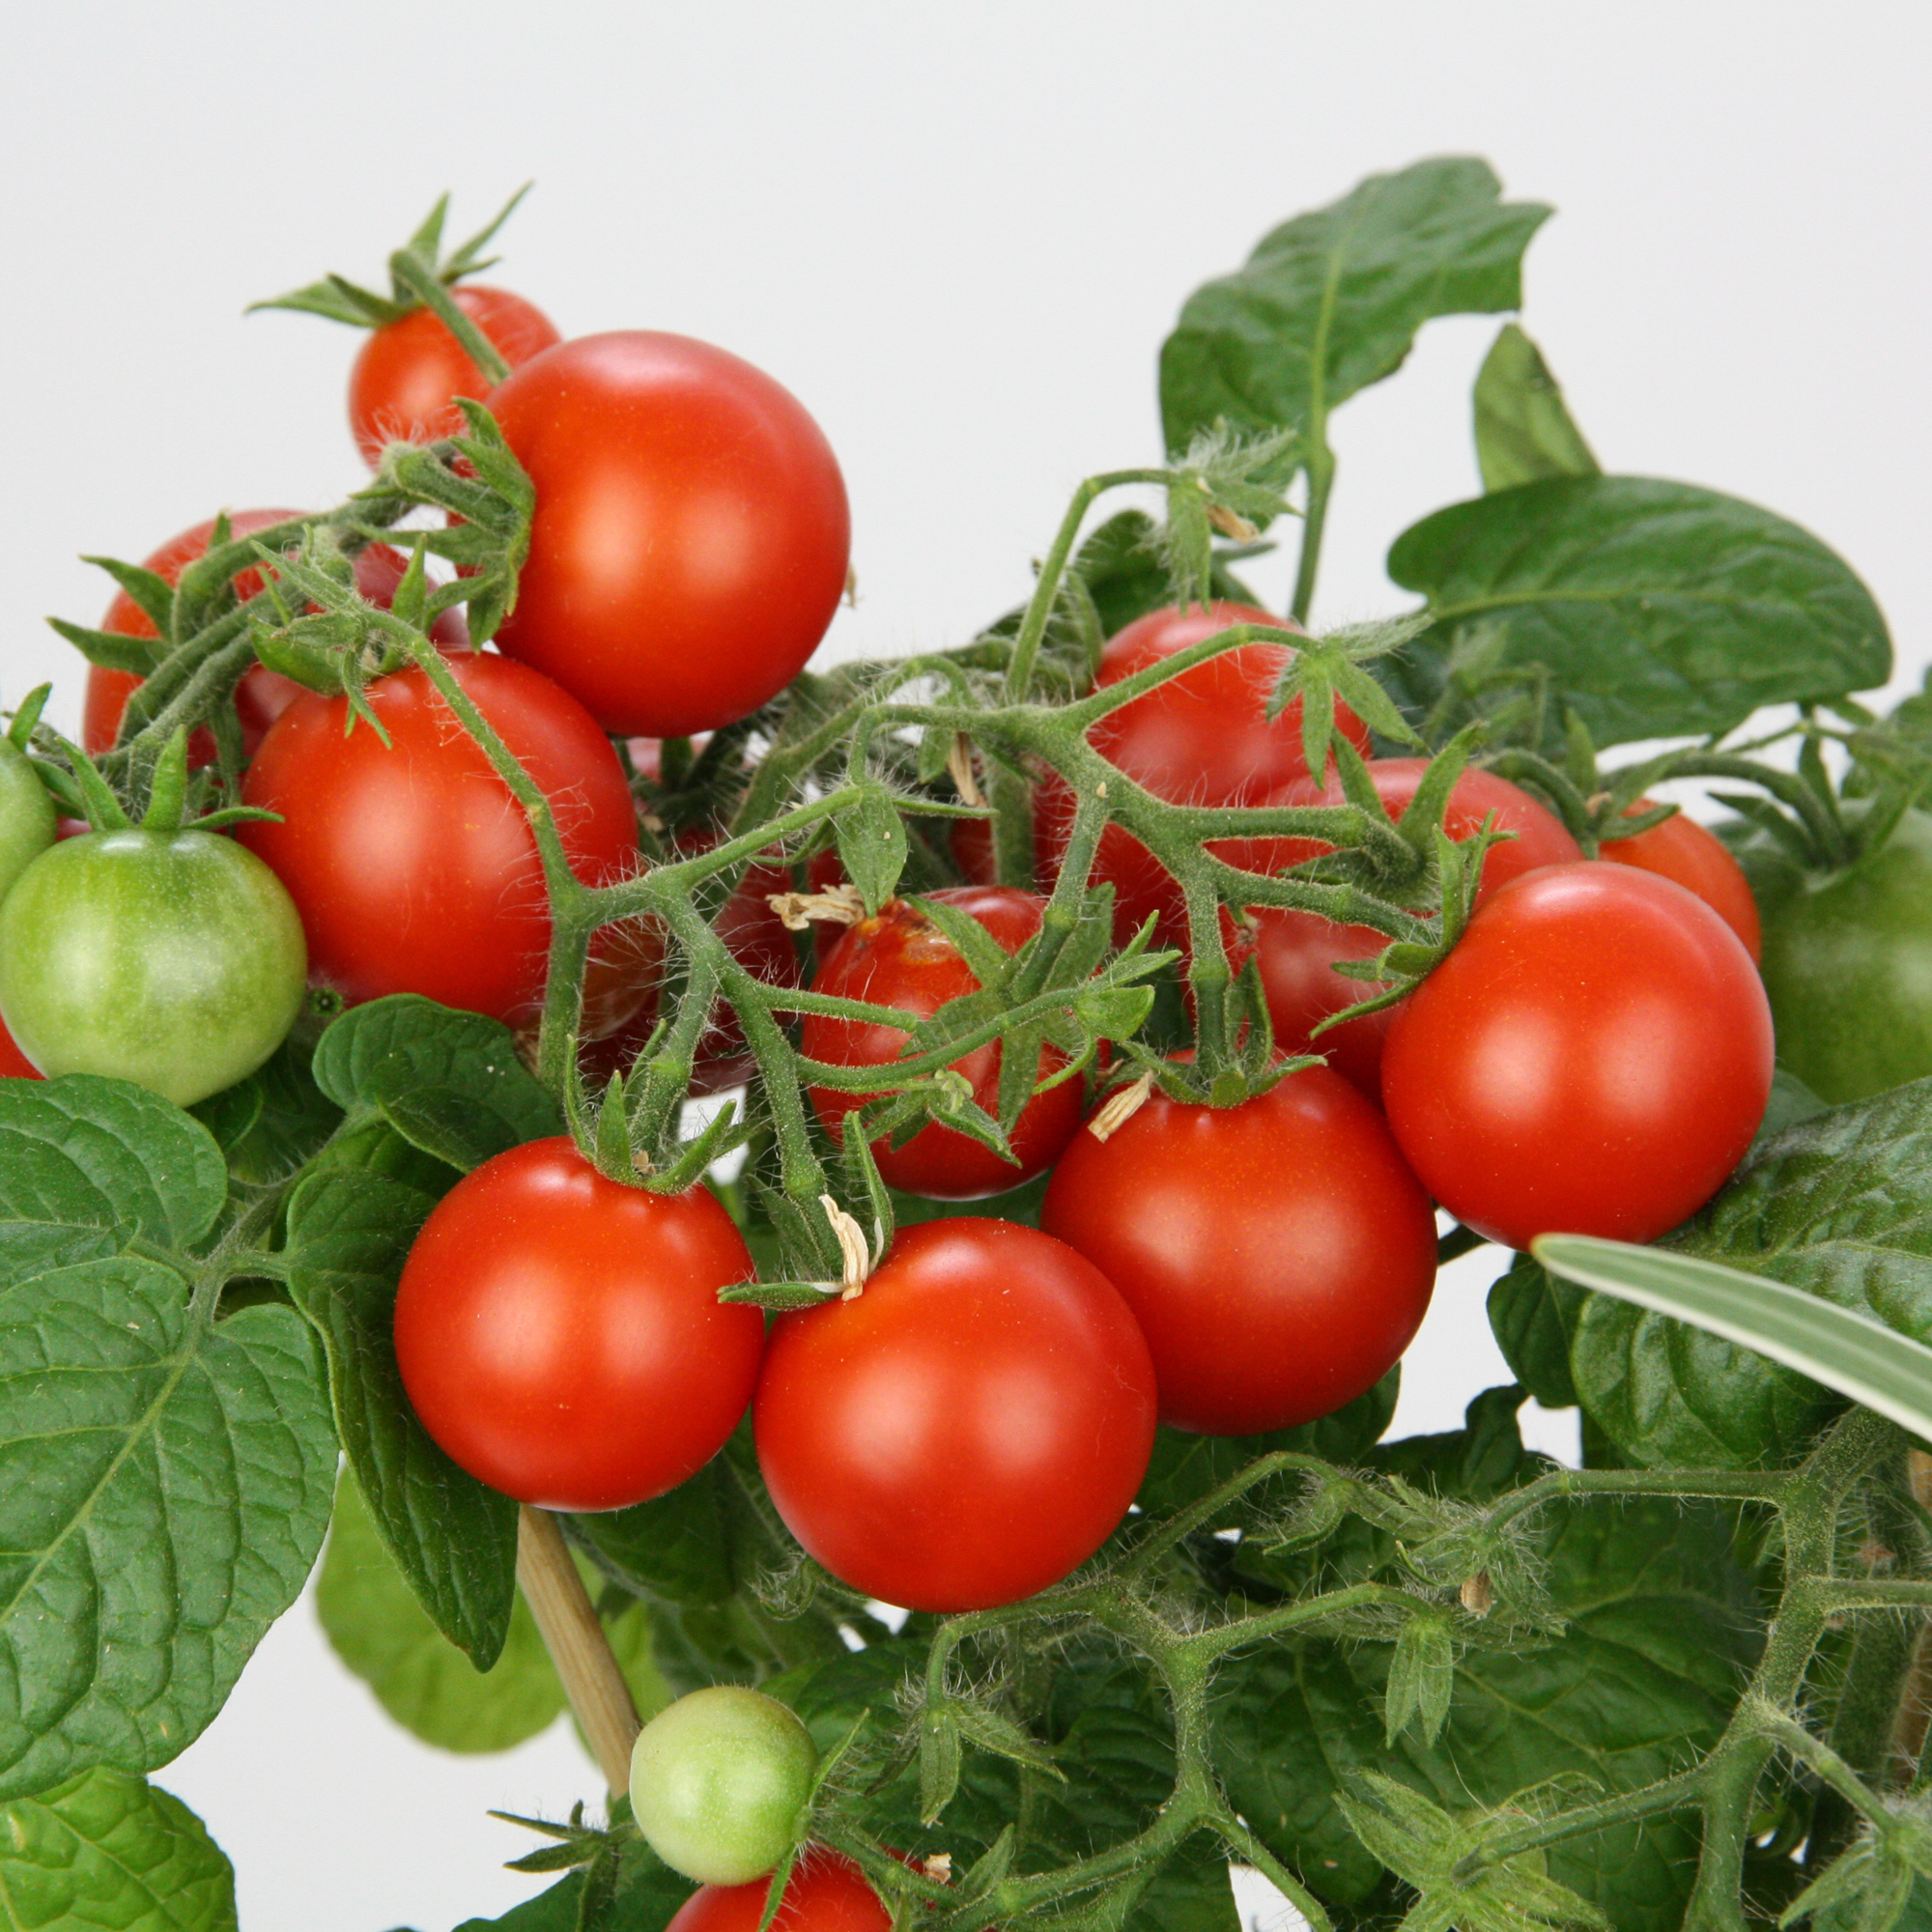 Bio-Naschtomate 12 cm Topf + product picture